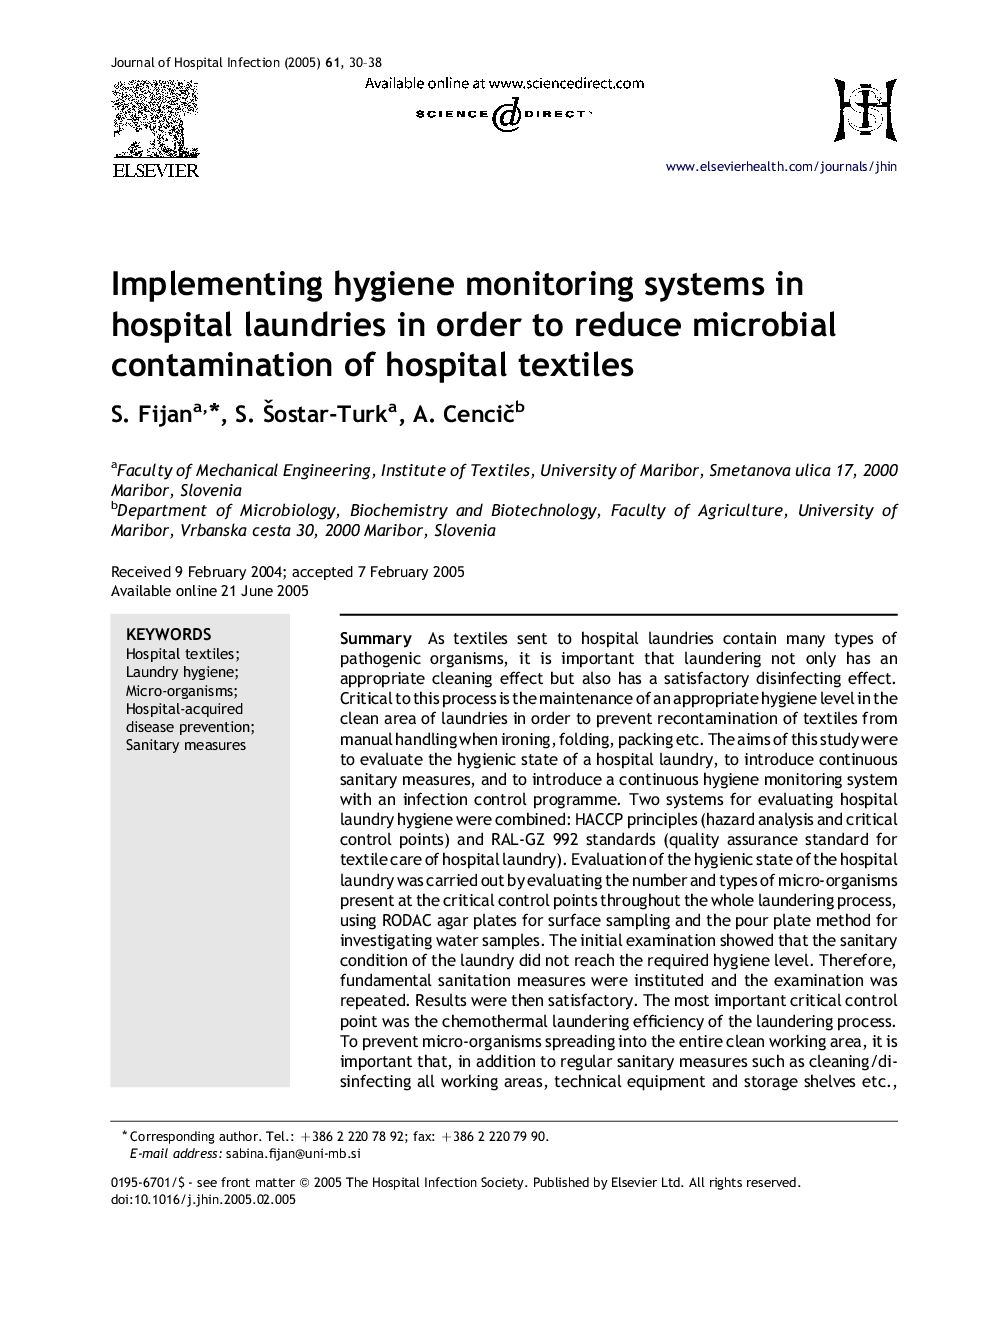 Implementing hygiene monitoring systems in hospital laundries in order to reduce microbial contamination of hospital textiles